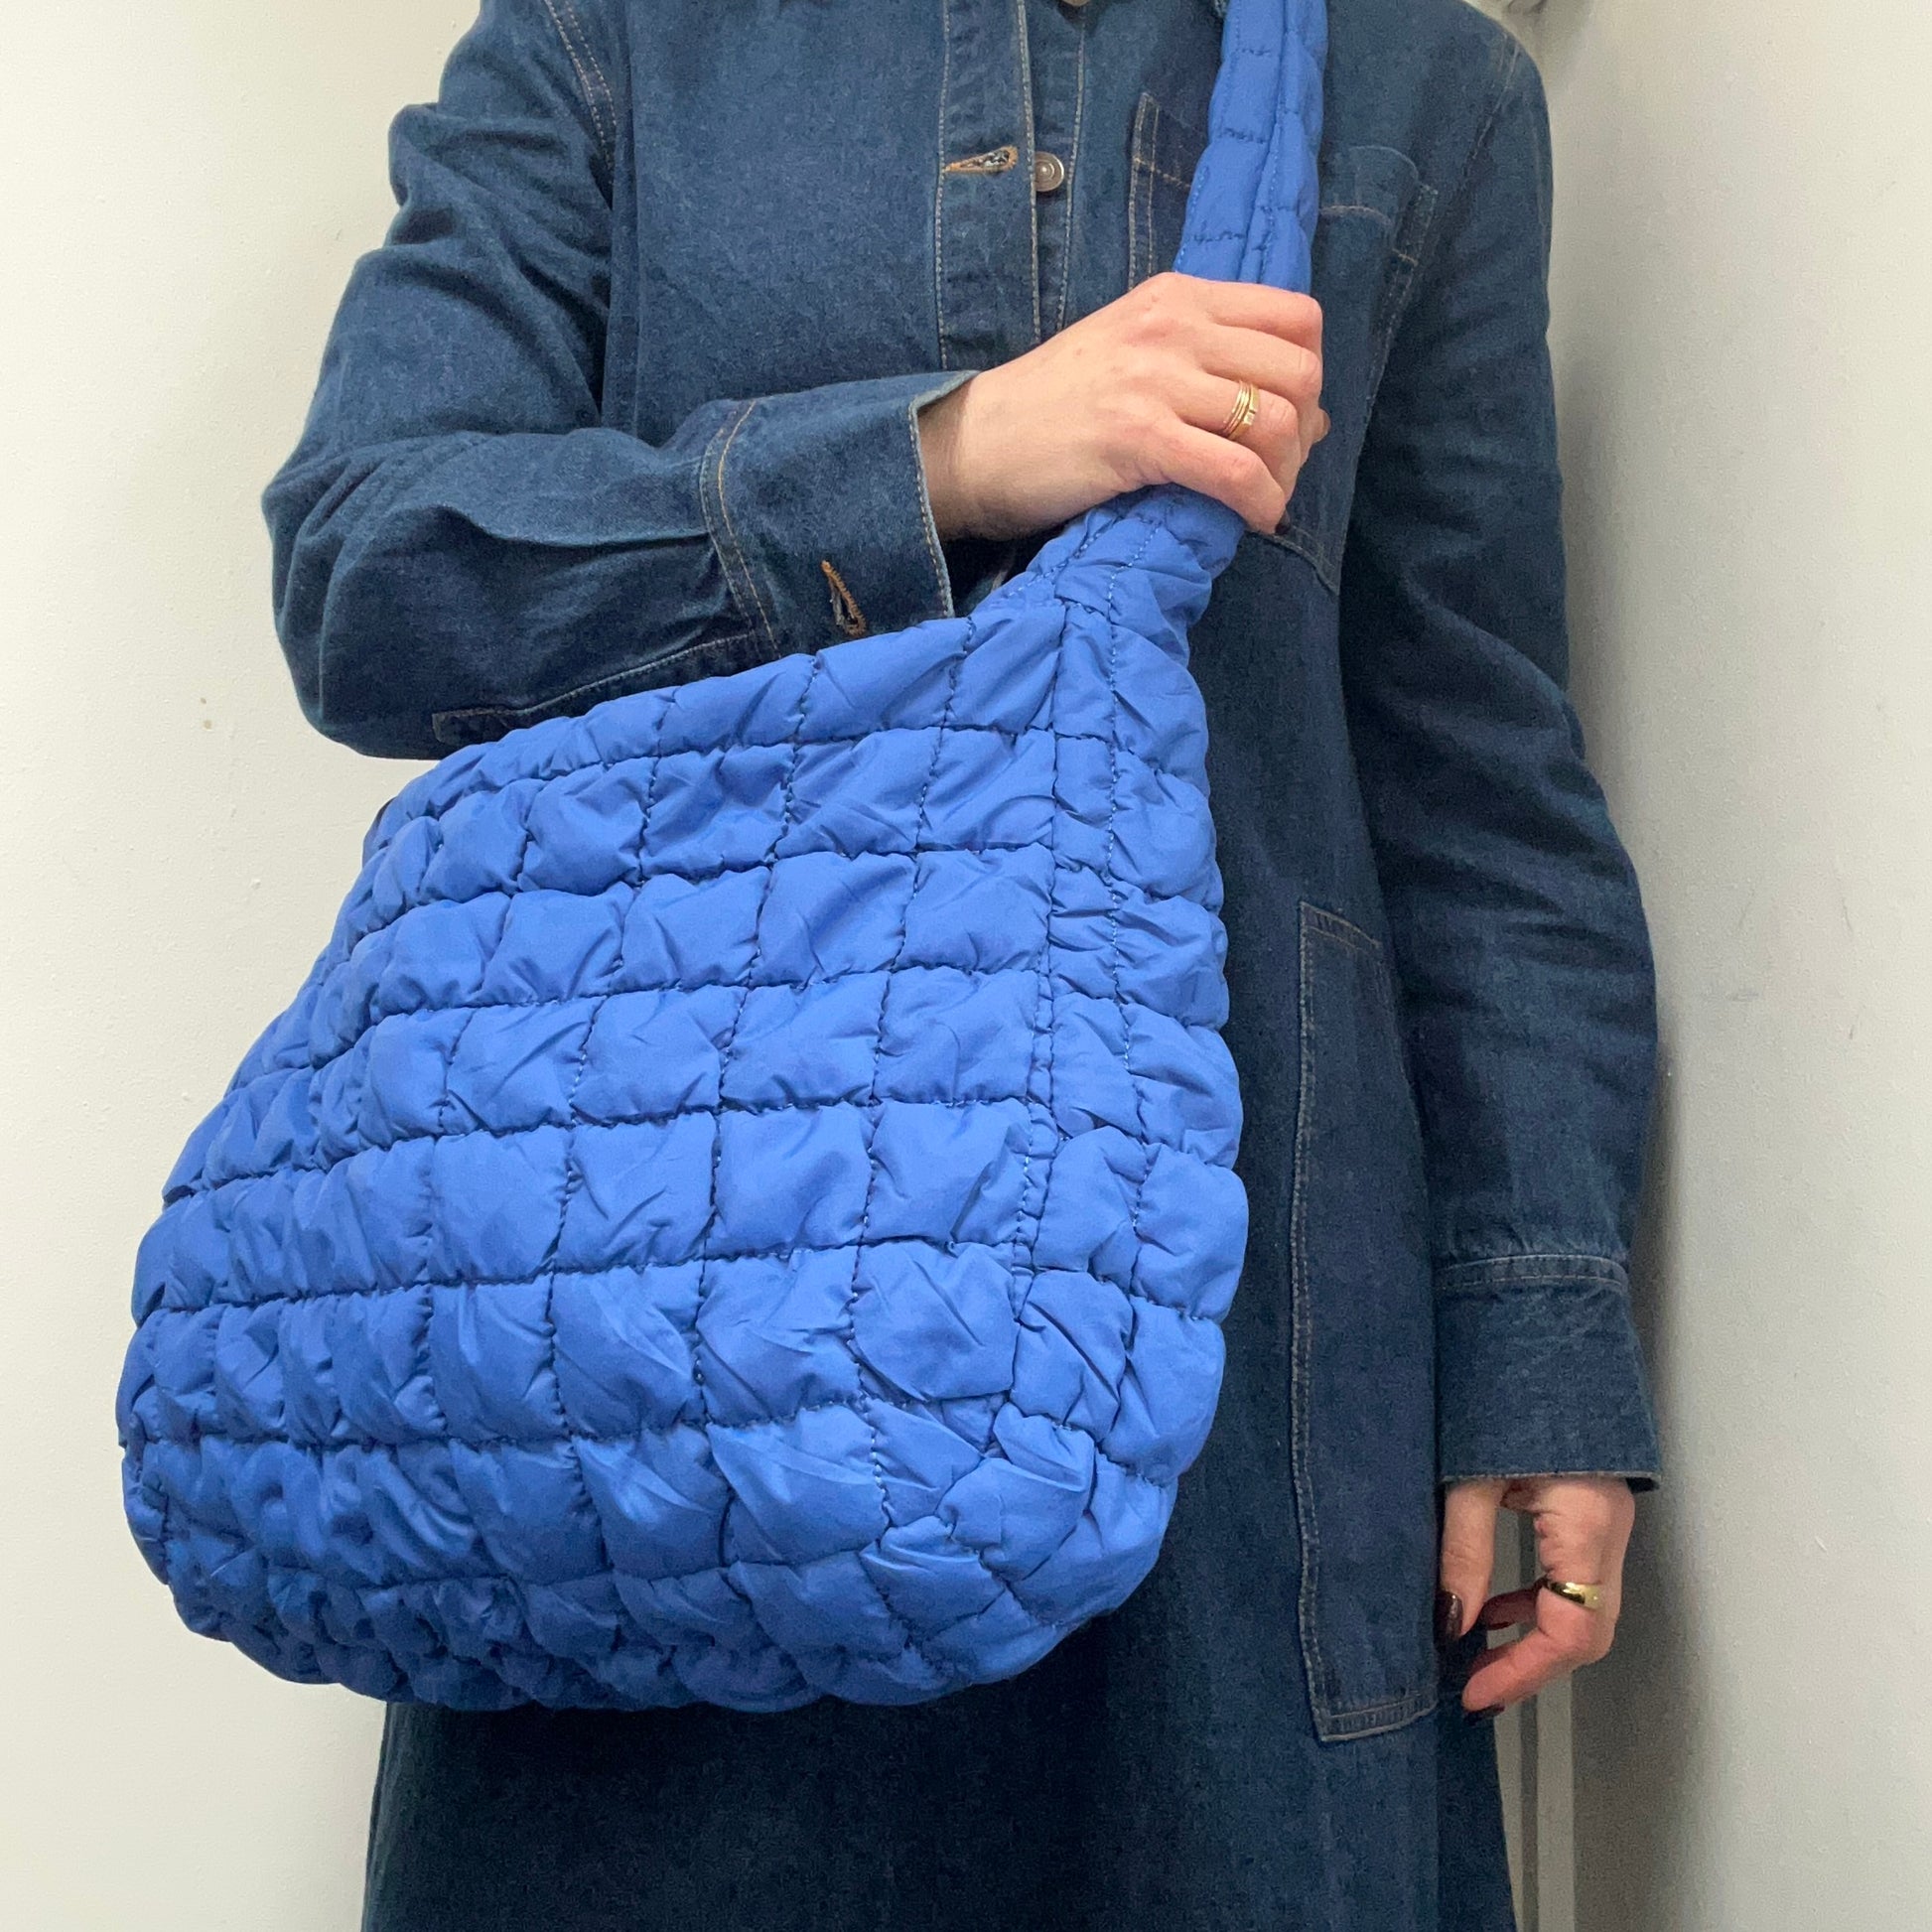 Quilted bag, perfect for pairing with jumpsuits or oversized jackets.